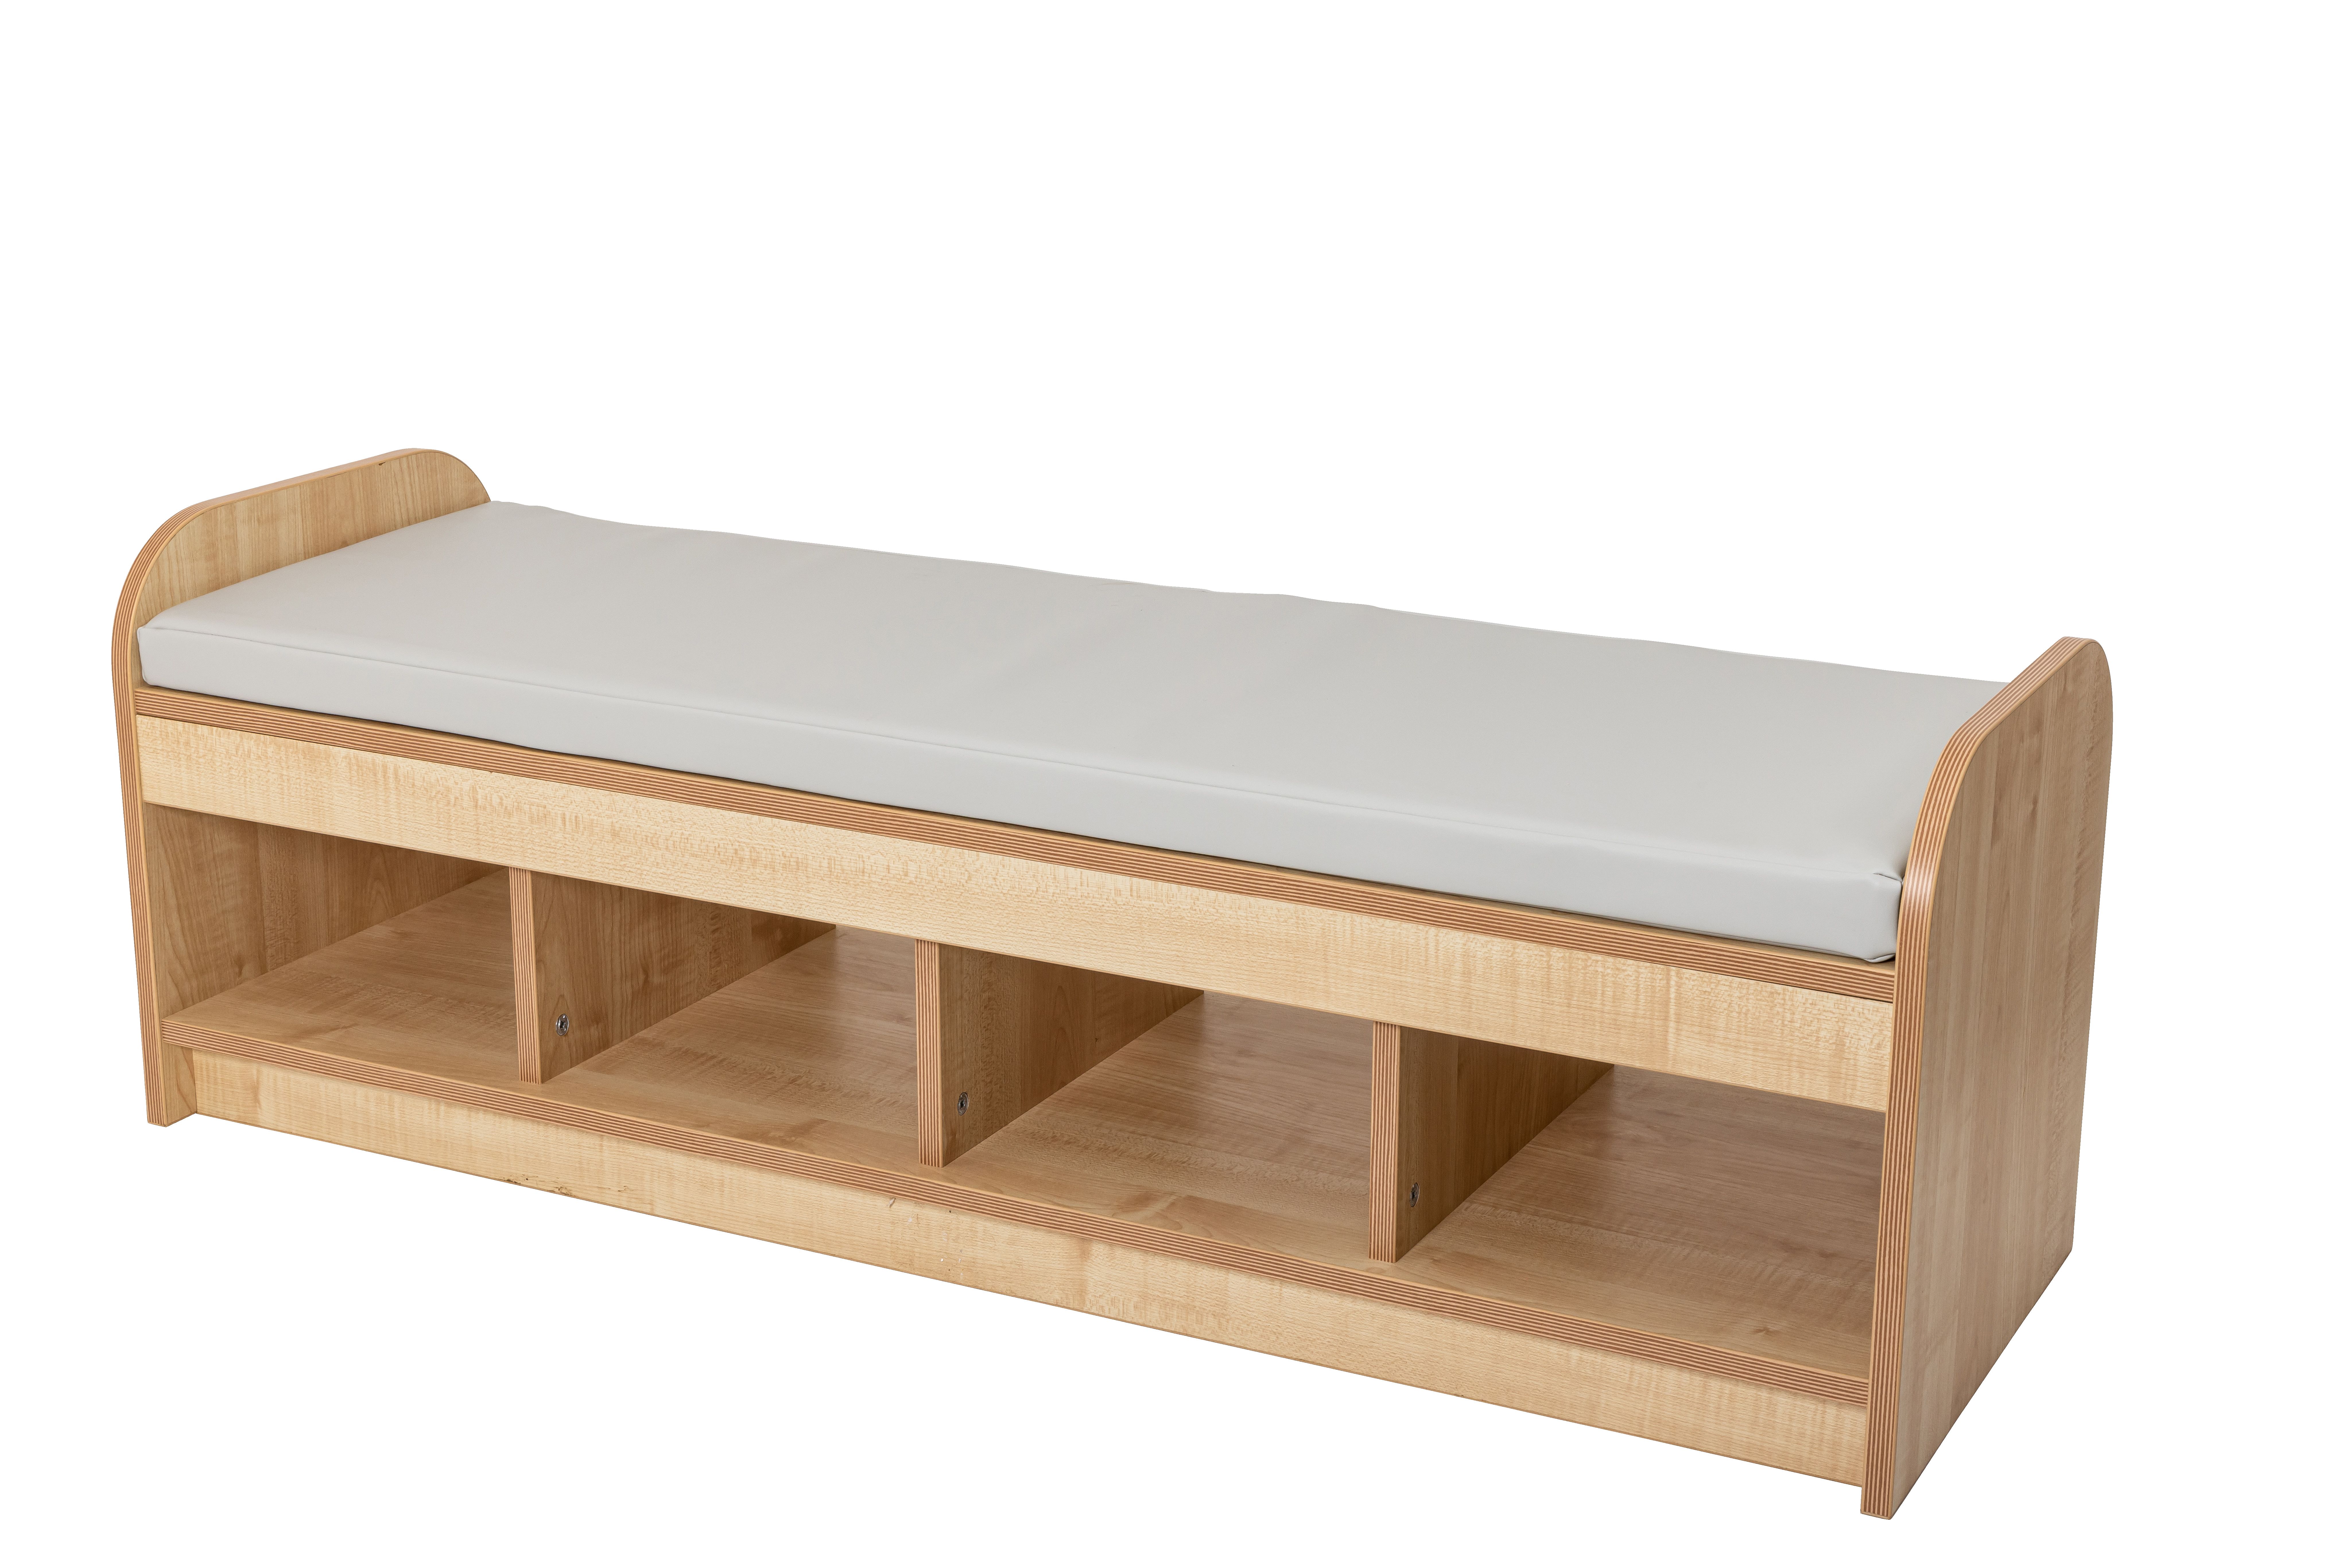 Maplescape low open play unit with bench